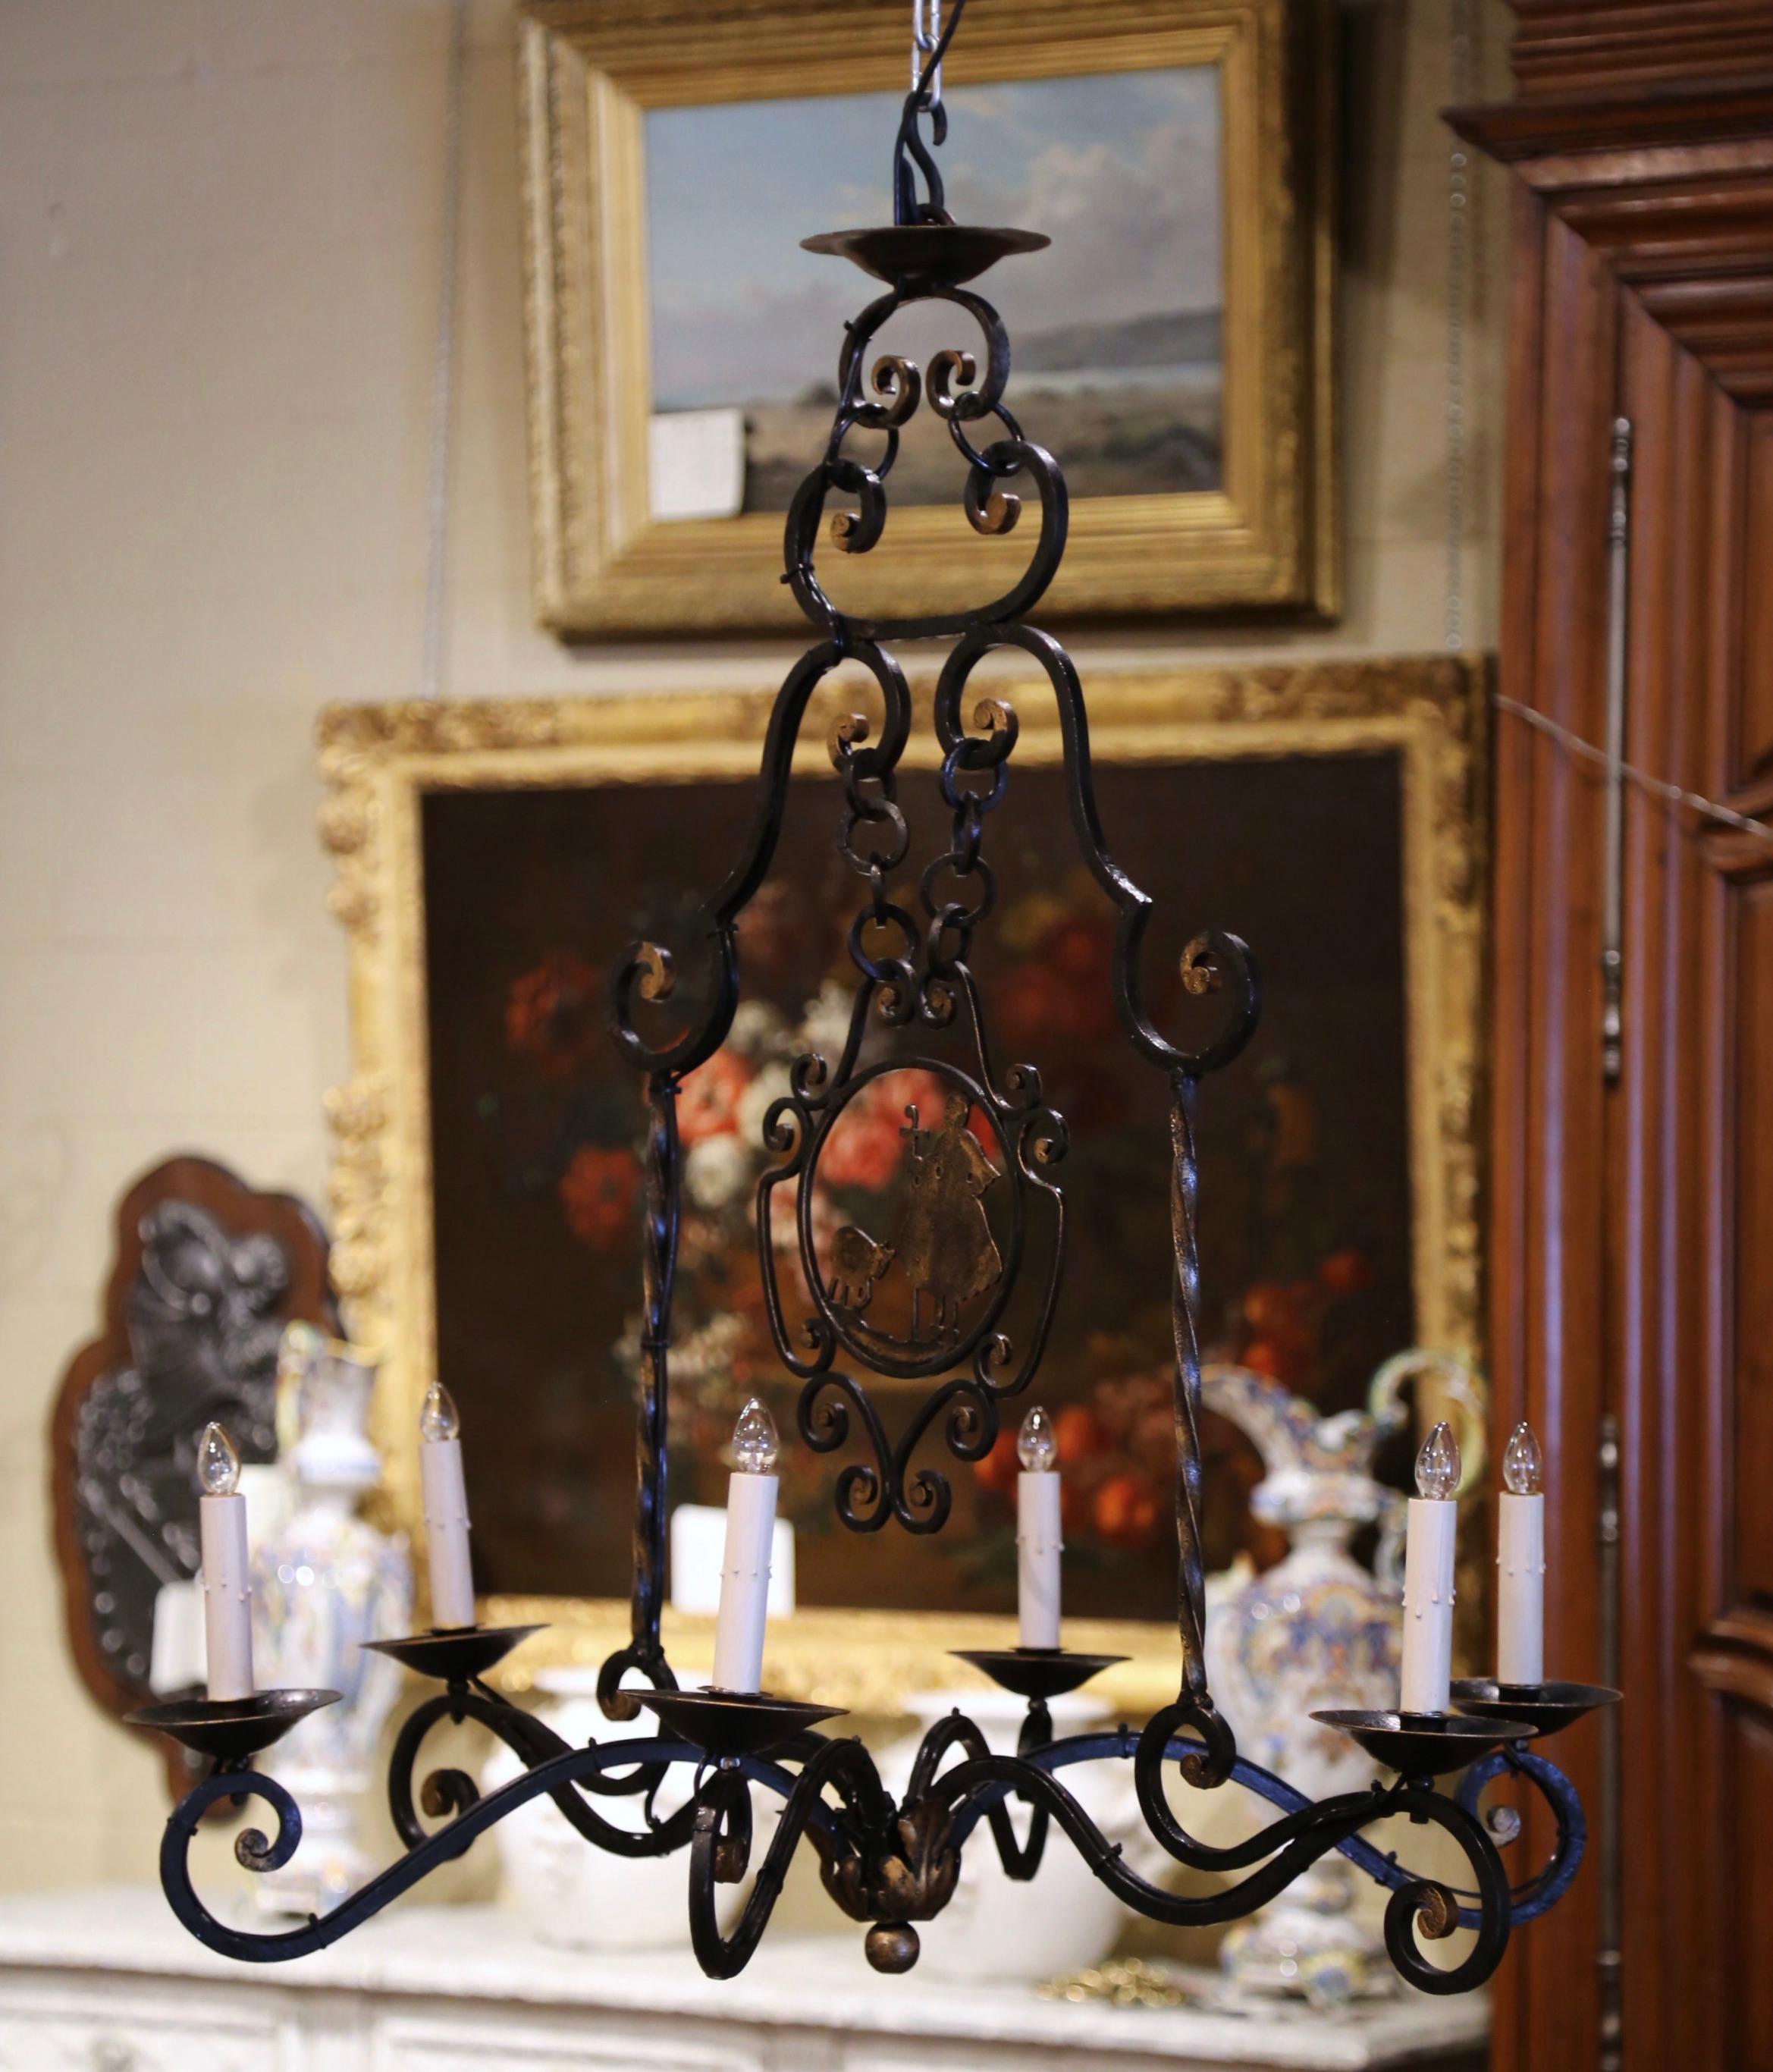 Bring some French flair to your breakfast room with this antique light fixture; crafted in France circa 1920, the iron chandelier has six-light embellished with a center carved shepherdess with her sheep. The fixture has been rewired and dressed